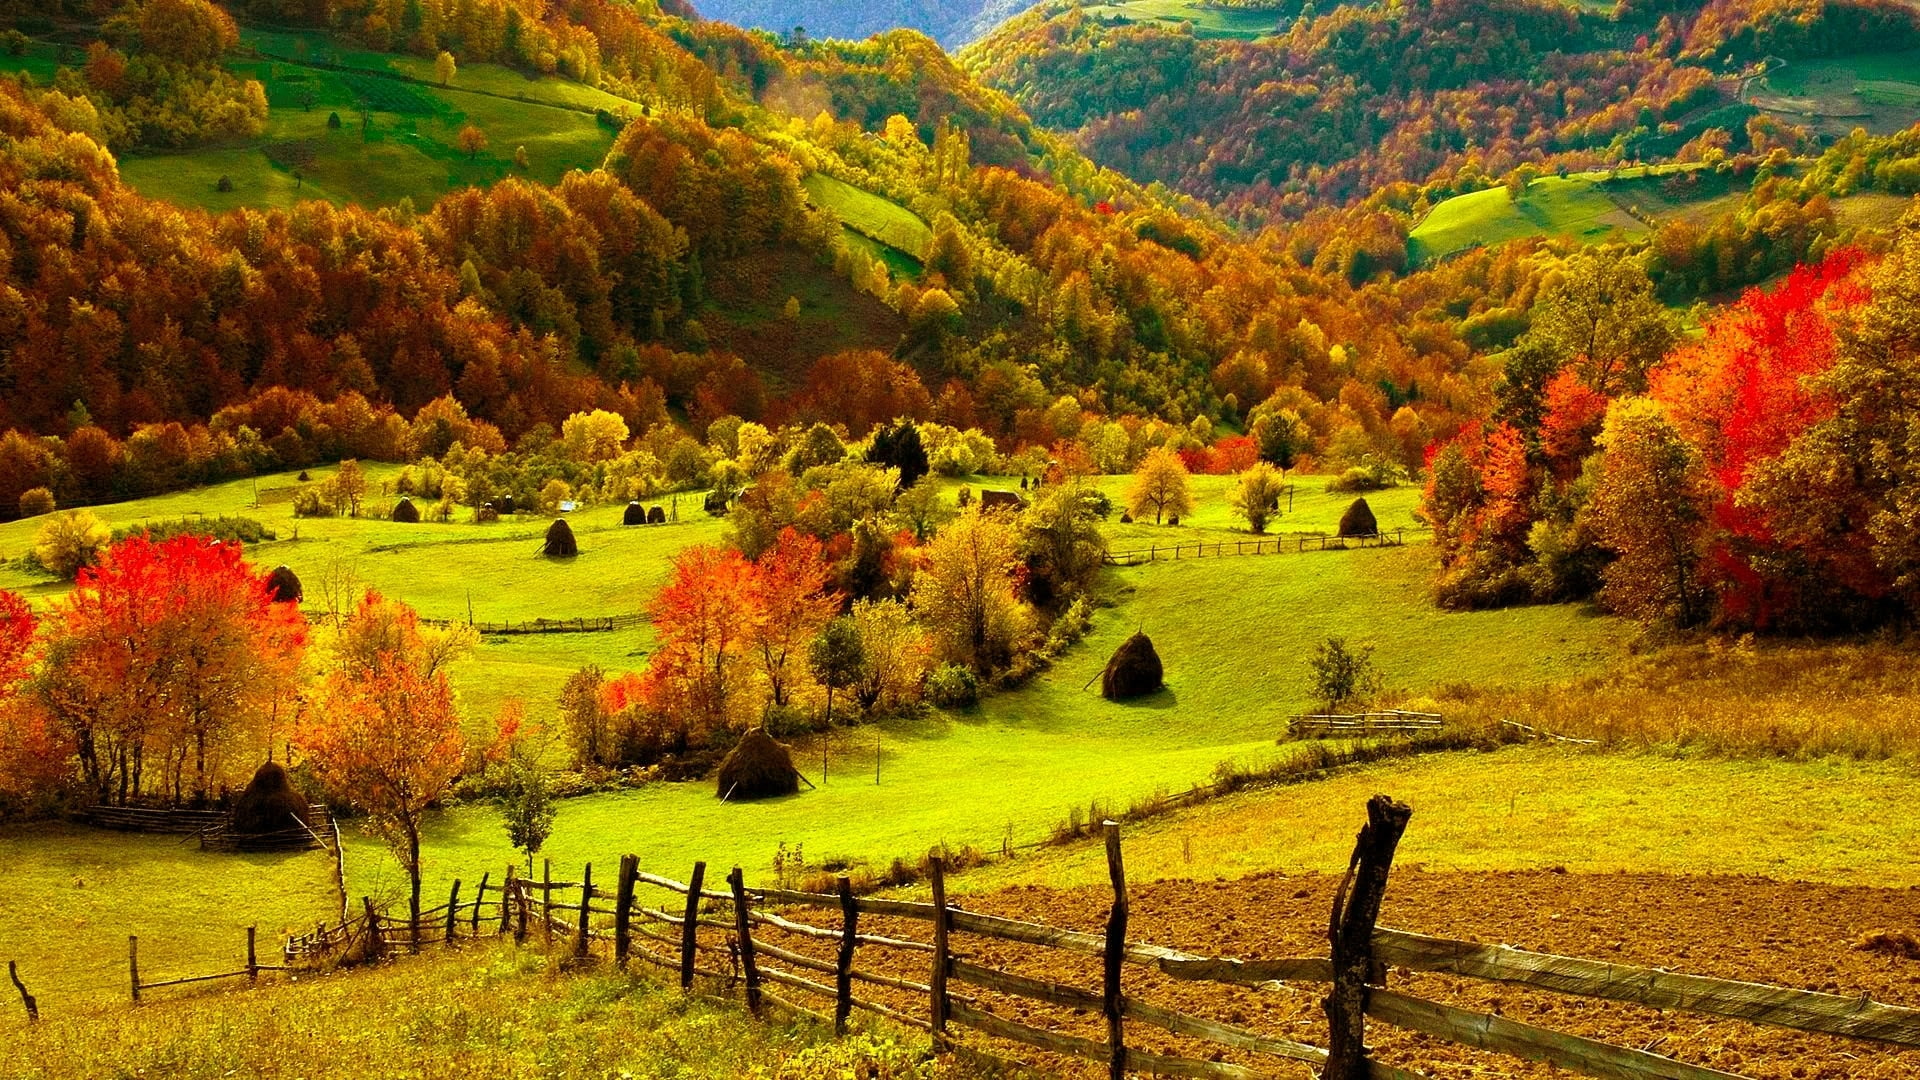 autumn, bright, color, crops, fall, farm, fence, fields, forests